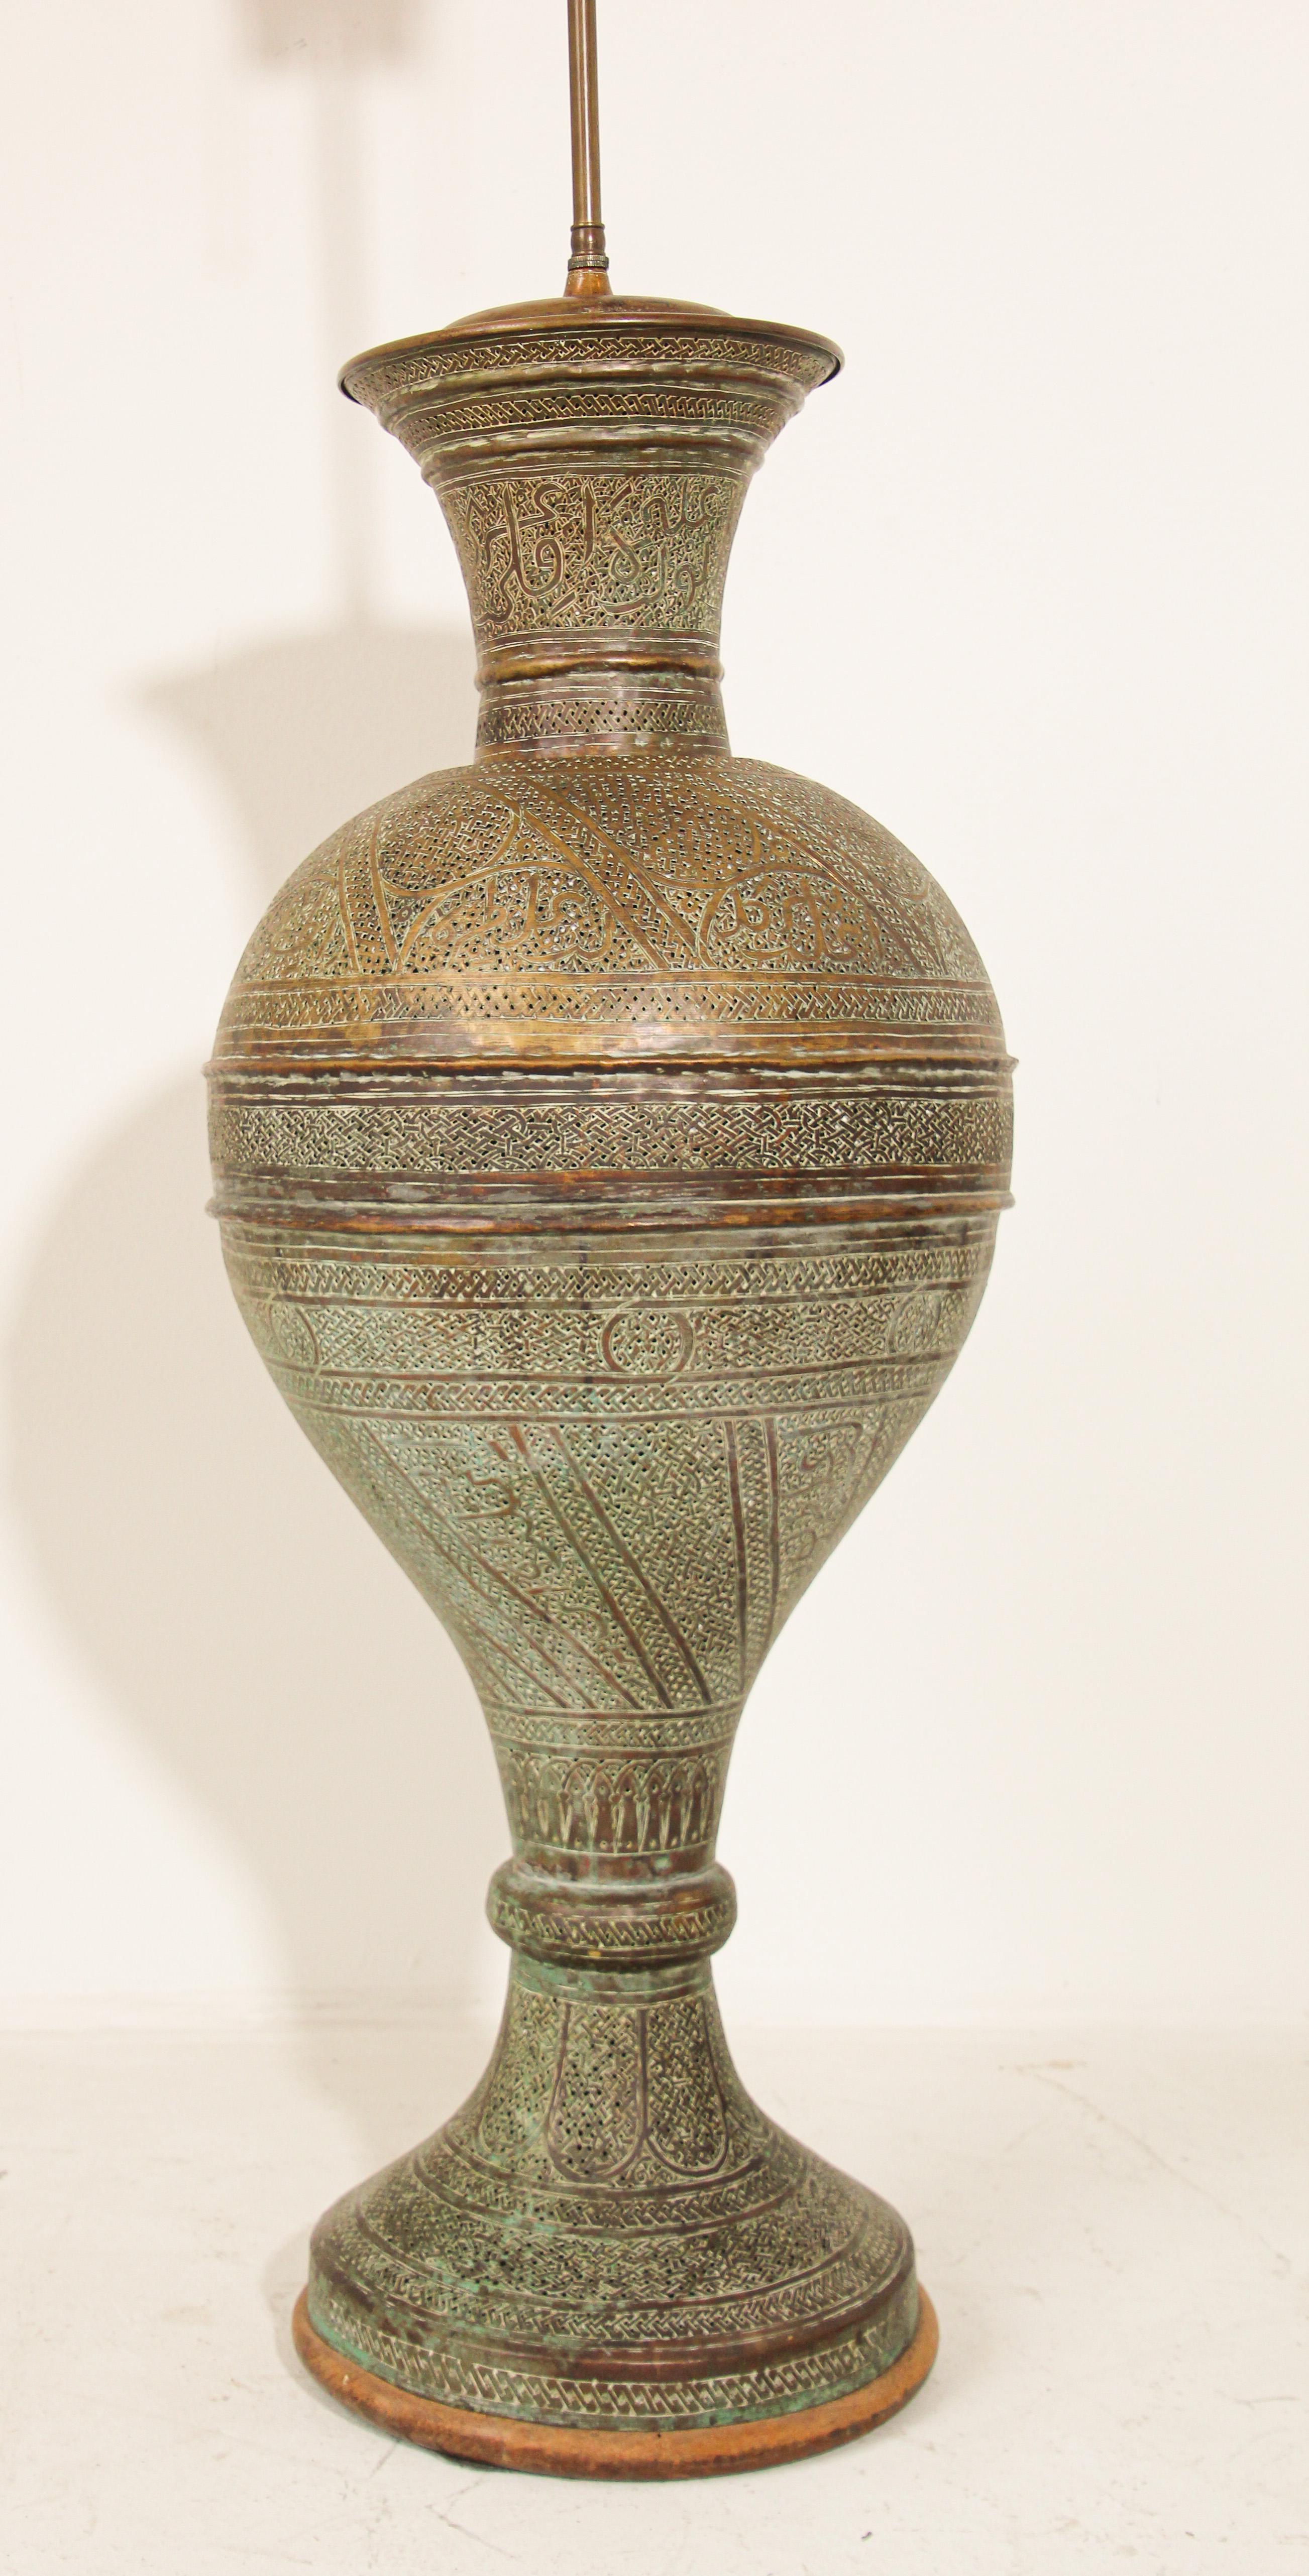 Elegant antique Oriental Middle Eastern hand-etched and pierced finely engraved patinated floor lamp.
Intricate Indo-Persian decoration on the tall brass urn with a trumpet style neck mounted on an wood base.
Extremely fine antique 19th century